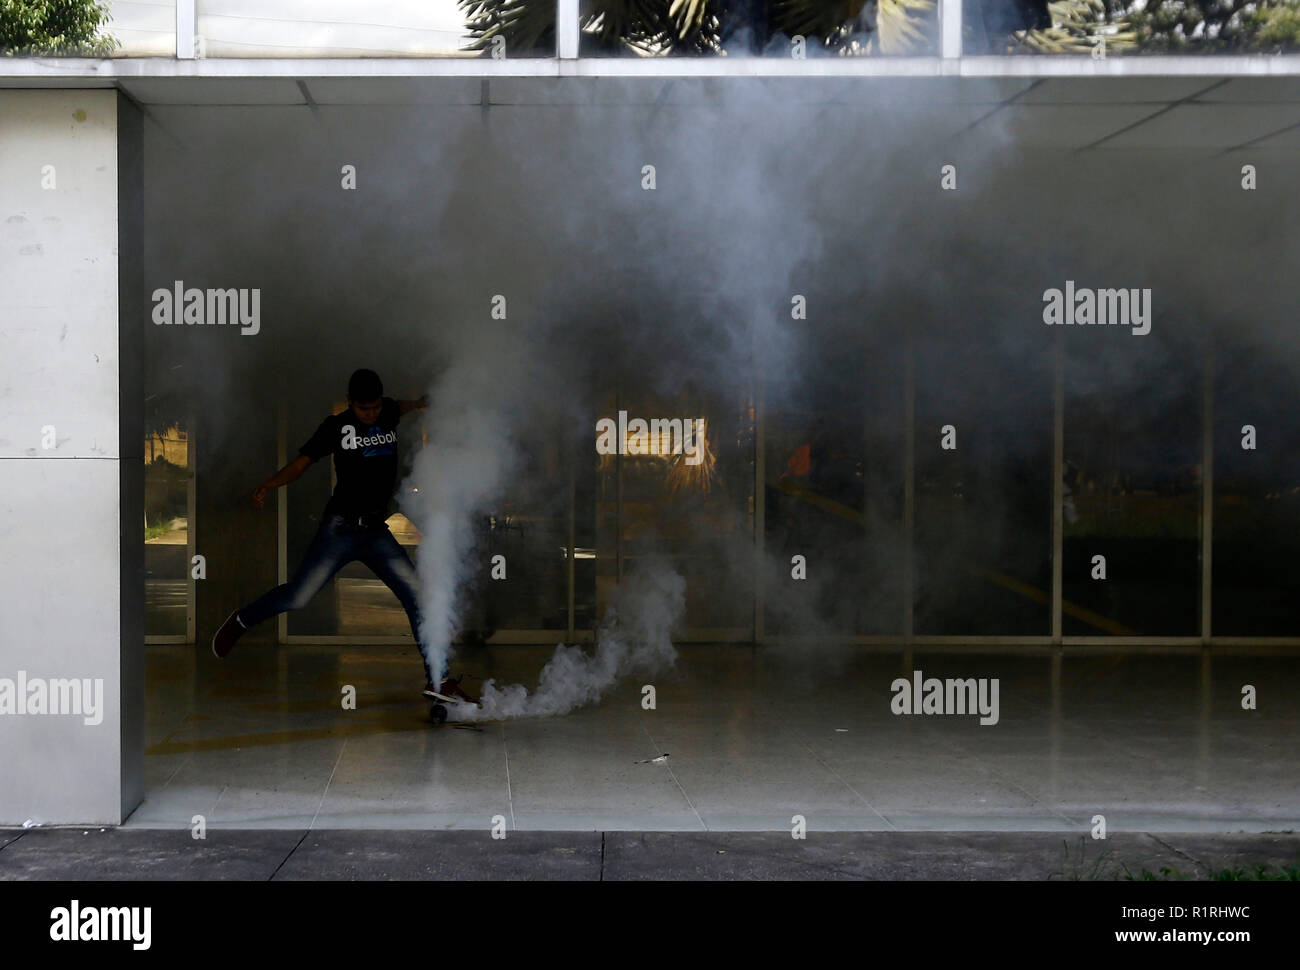 Valencia, Carabobo, Venezuela. 14th Nov, 2018. November 14, 2018. A student kicks the tear-gas bomb that will launch unknown elements to sabotage the electoral process of the student elections at the University of Carabobo. In Valencia. Venezuela . Photo: Juan Carlos Hernandez Credit: Juan Carlos Hernandez/ZUMA Wire/Alamy Live News Stock Photo